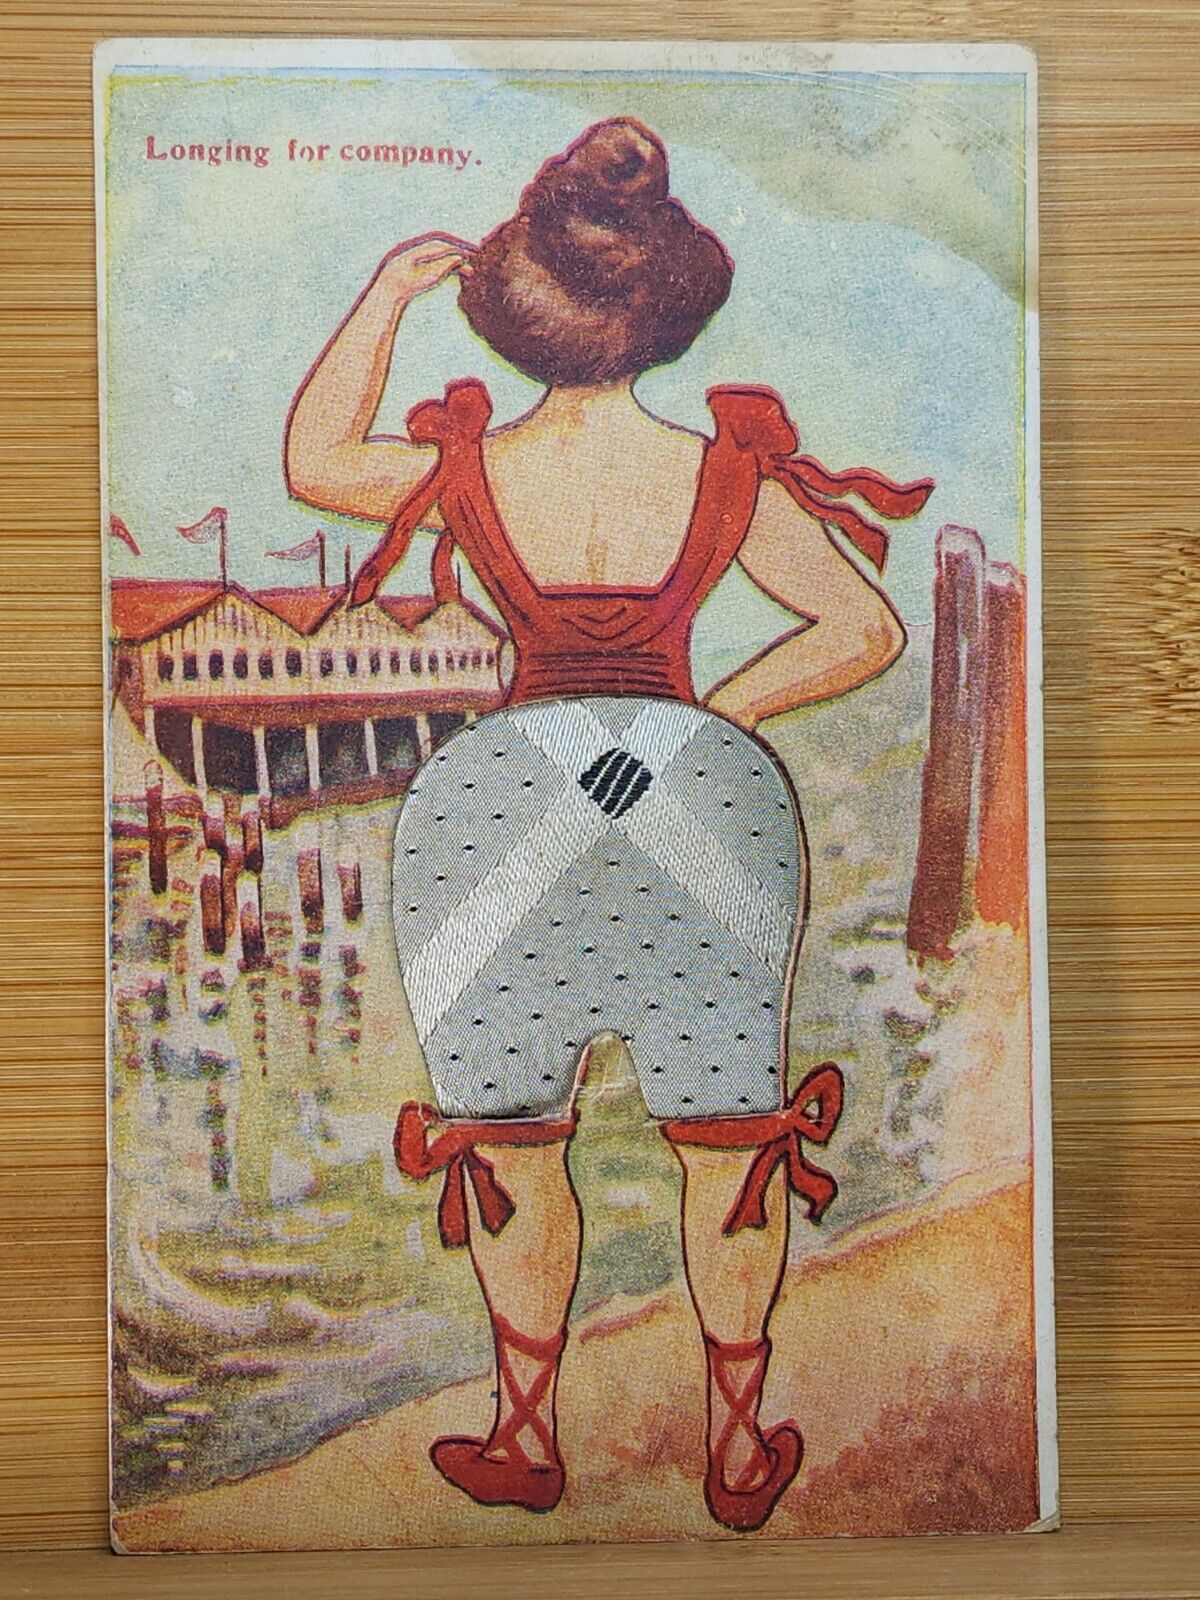 1910s Pincushion WOMAN ON BEACH Fabric Bathing Suit RISQUE Longing for Company